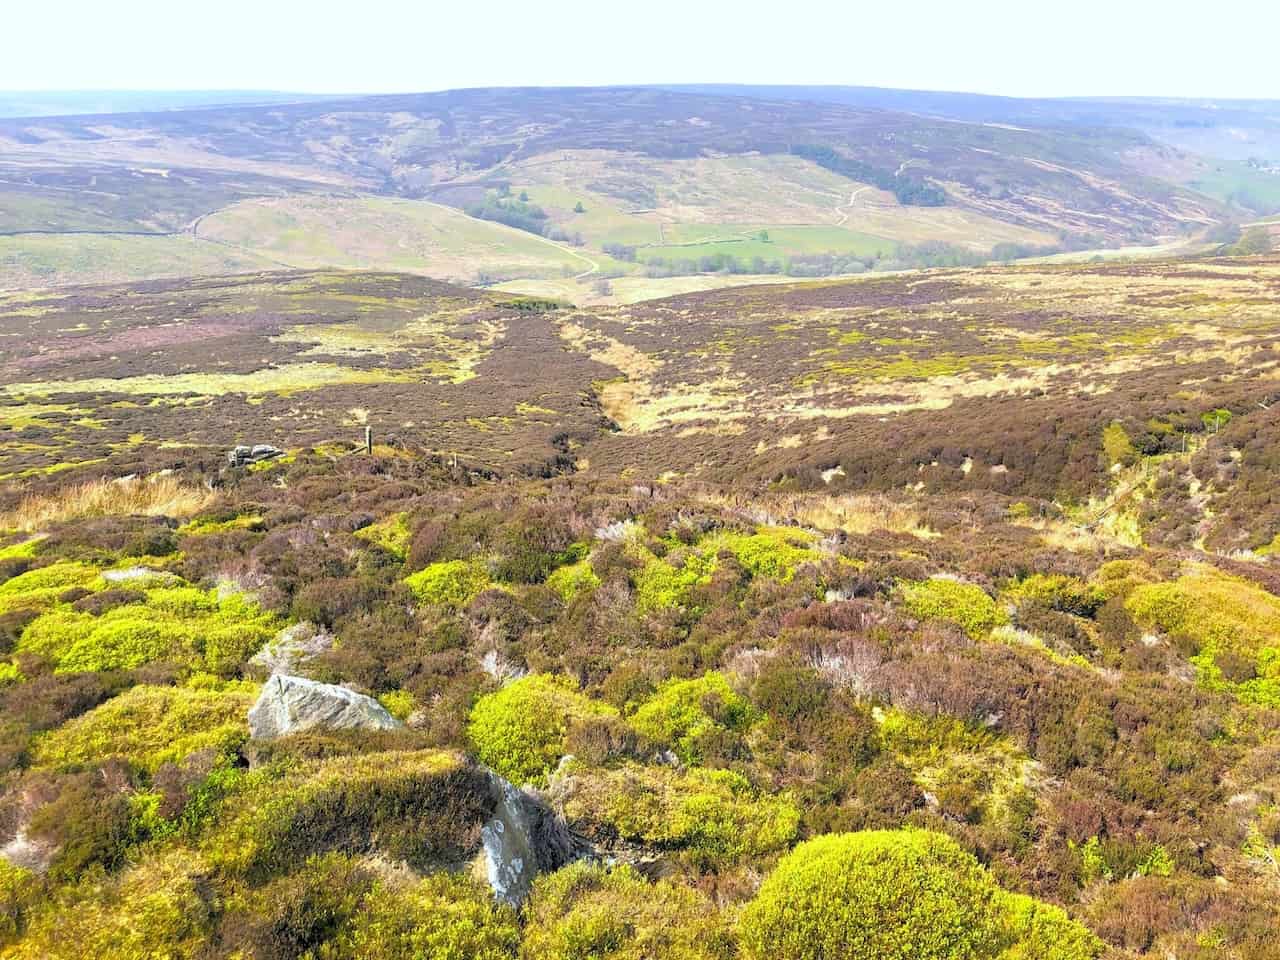 Westerdale Moor, where three streams called the Esklets merge to form the River Esk in the valley below.